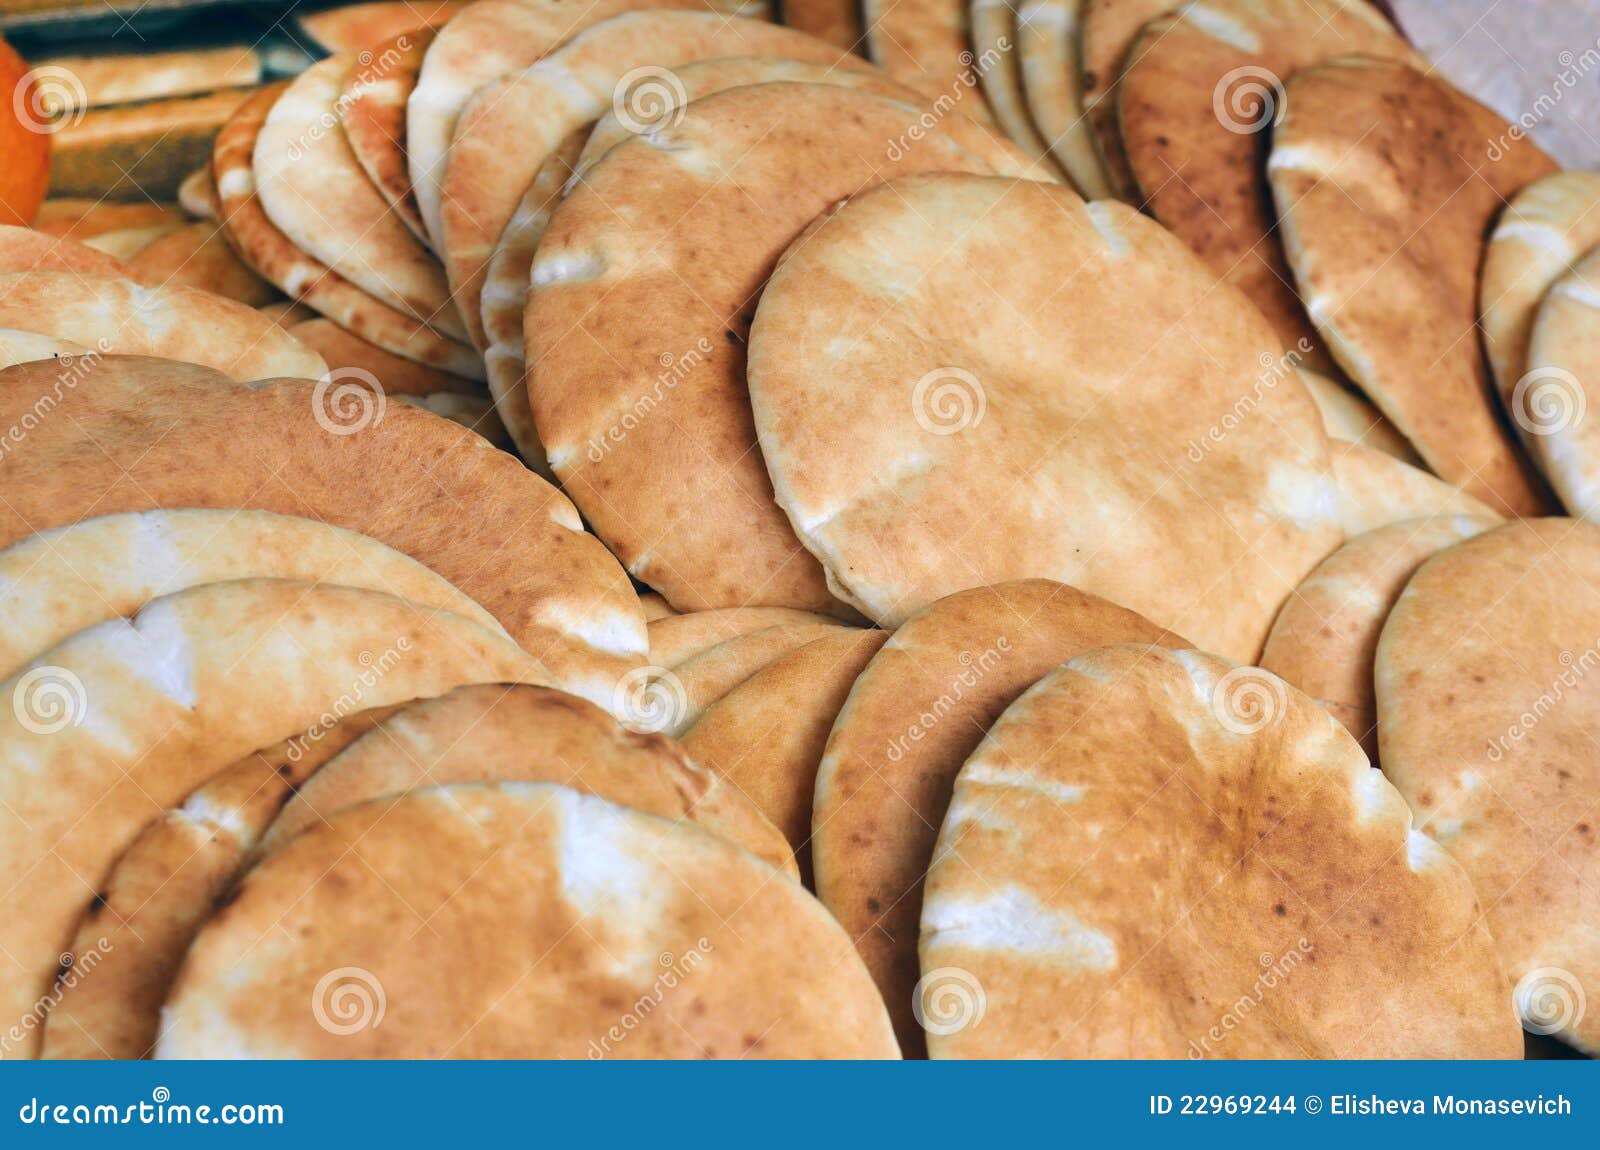 A Pitta Bread Oven At The Old City Of Jerusalem Stock Photo, Picture and  Royalty Free Image. Image 18180273.